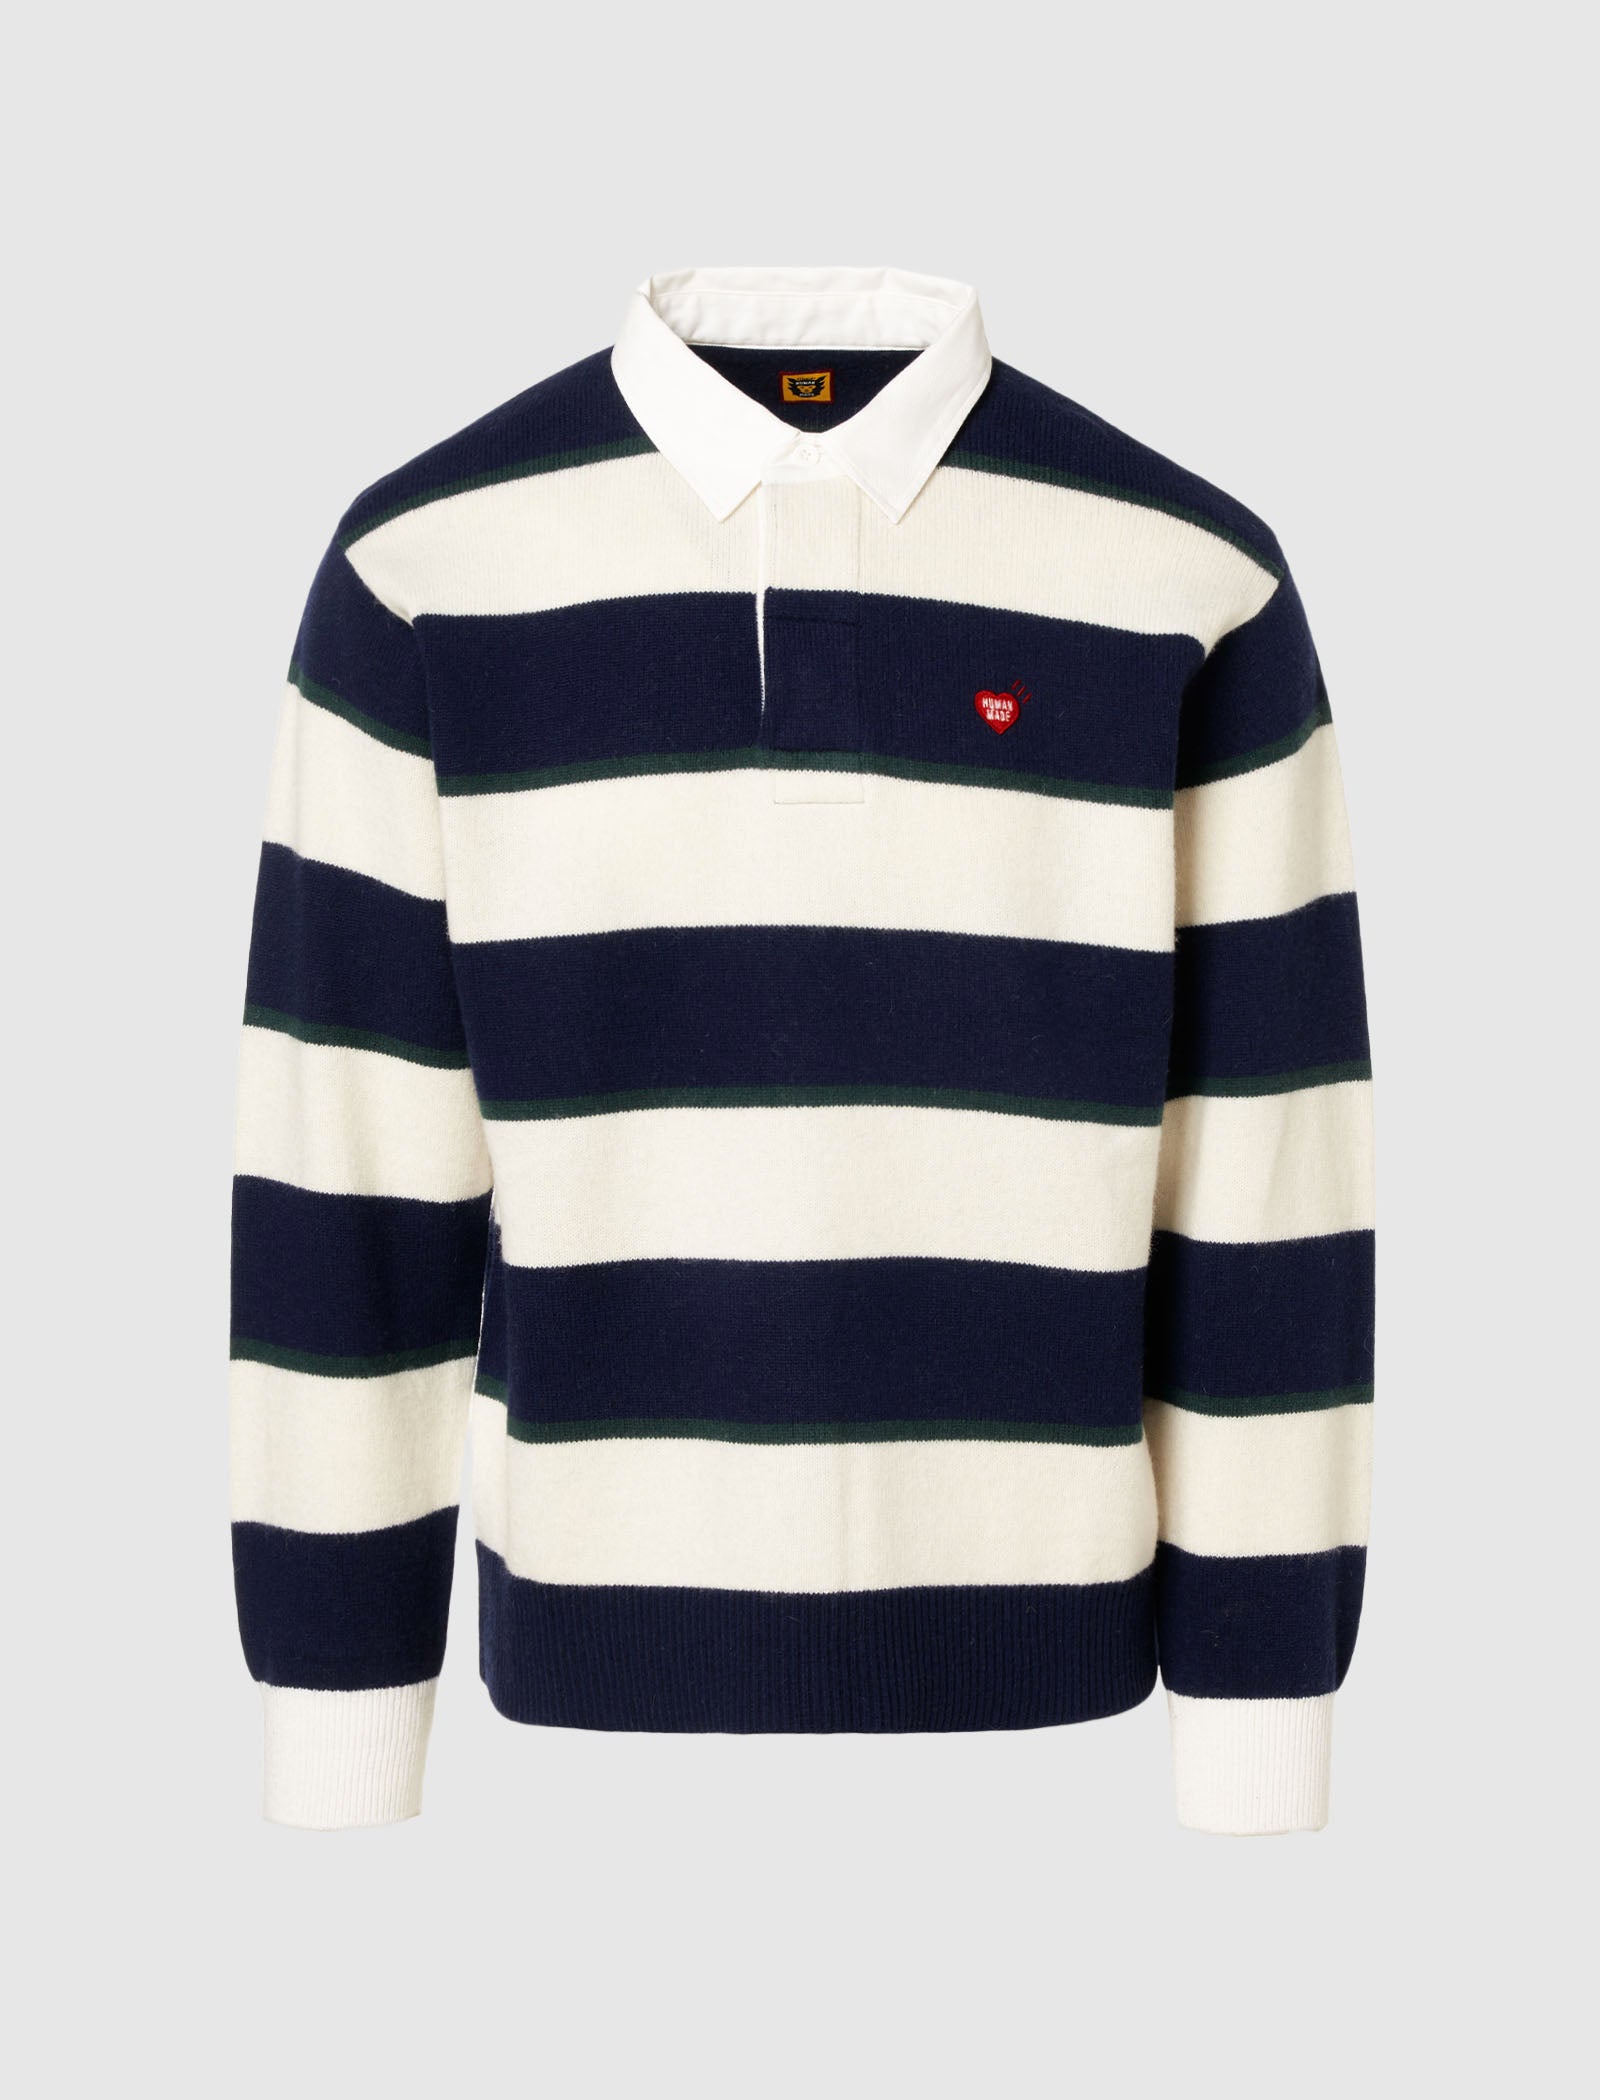 HUMAN MADE RUGBY KNIT SWEATER